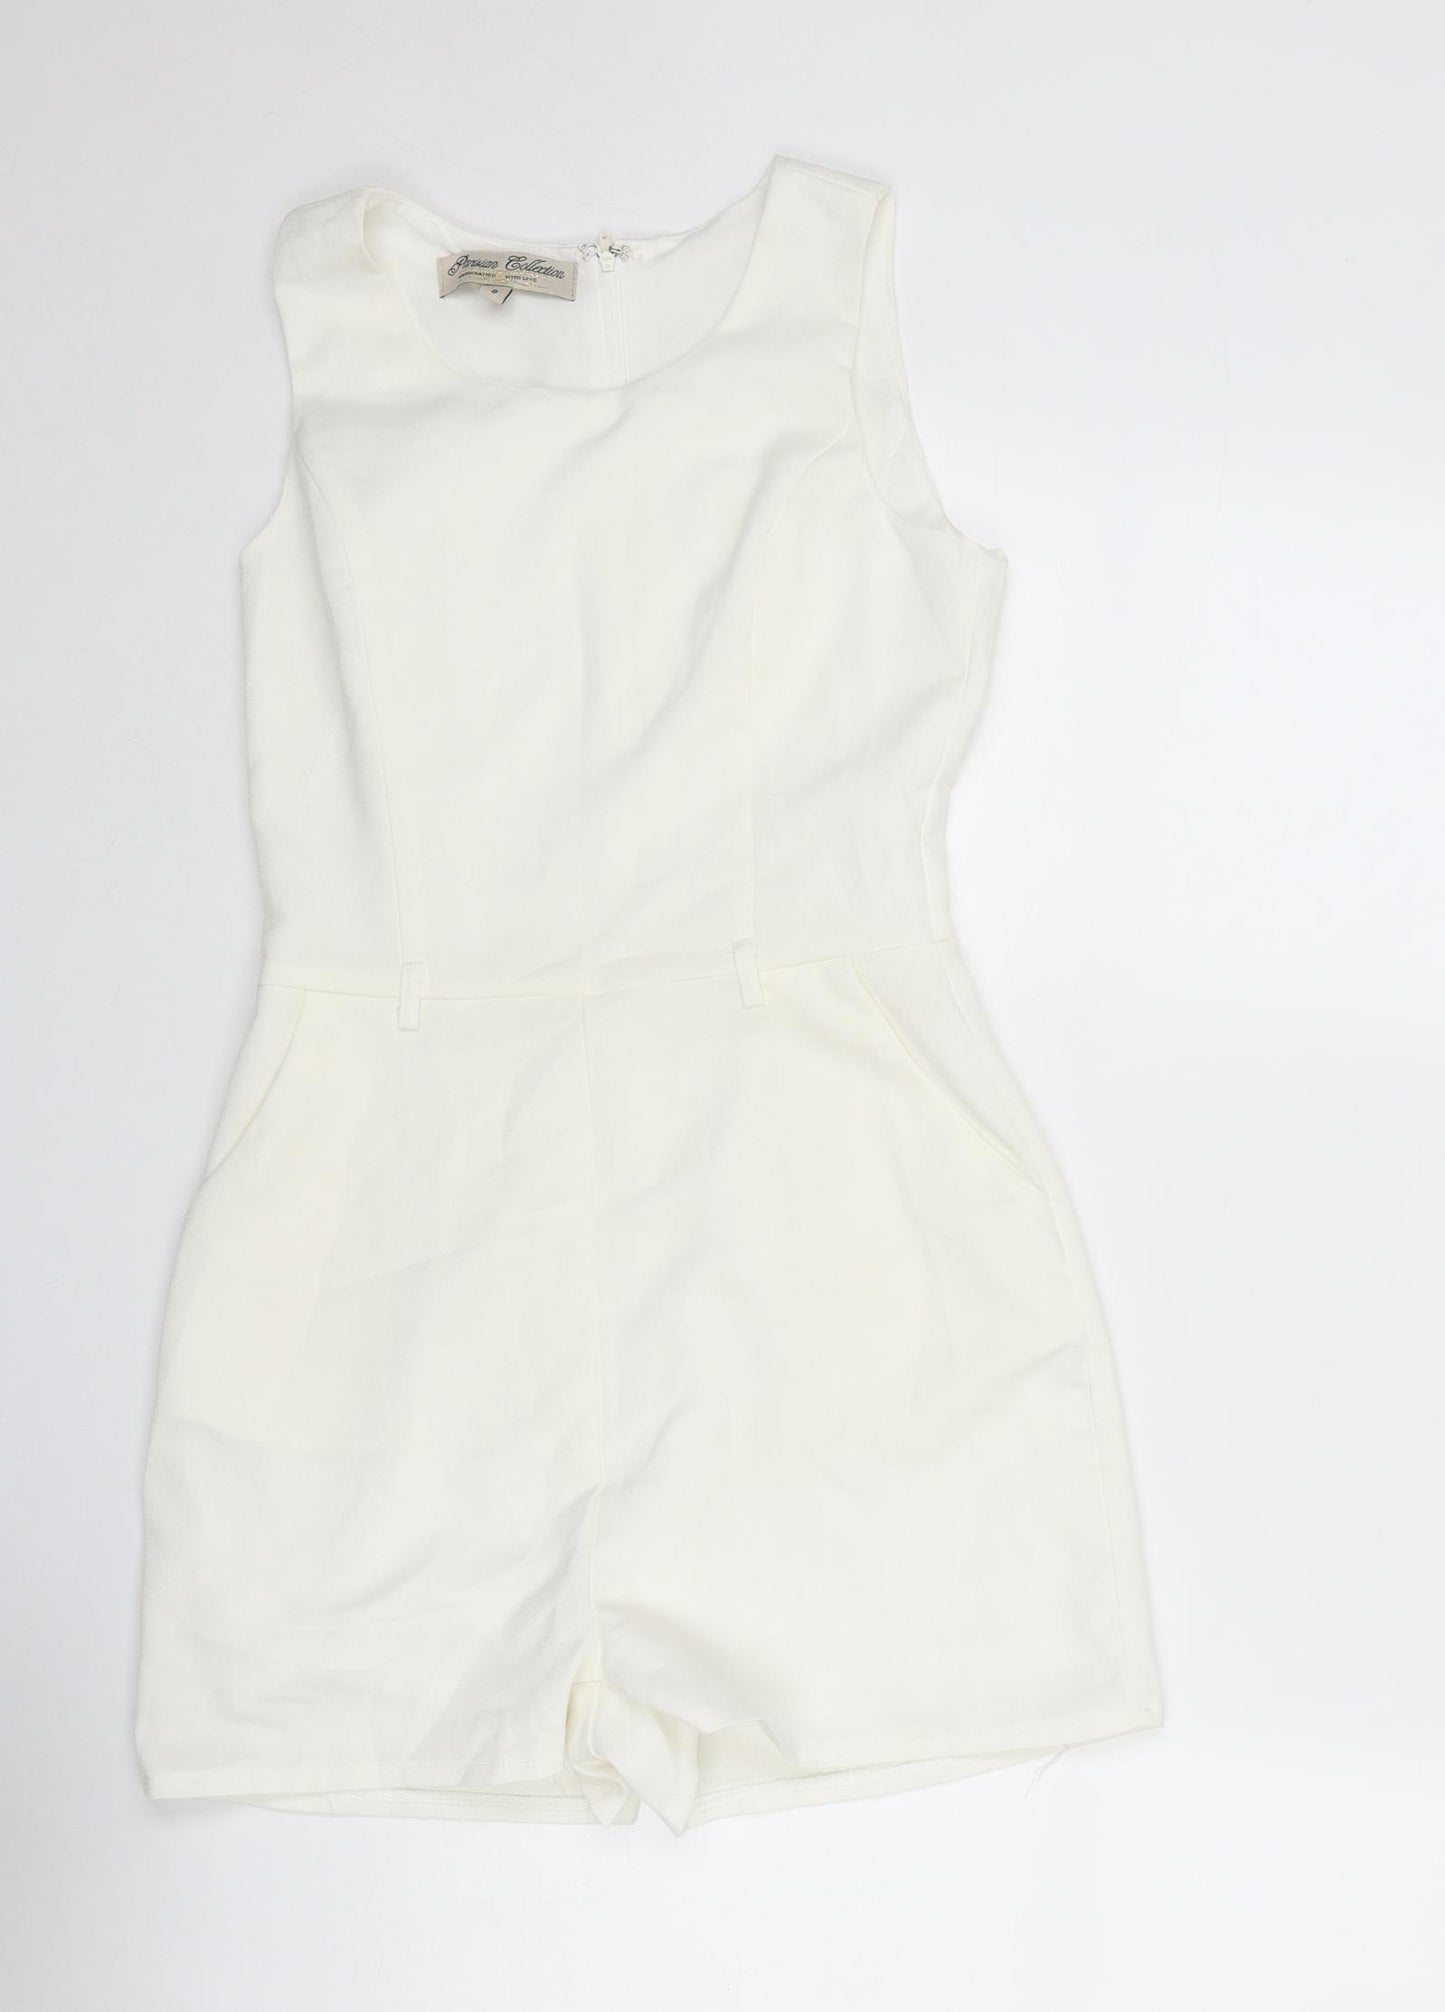 Parisian Collection Womens Ivory Polyester Playsuit One-Piece Size 8 Zip